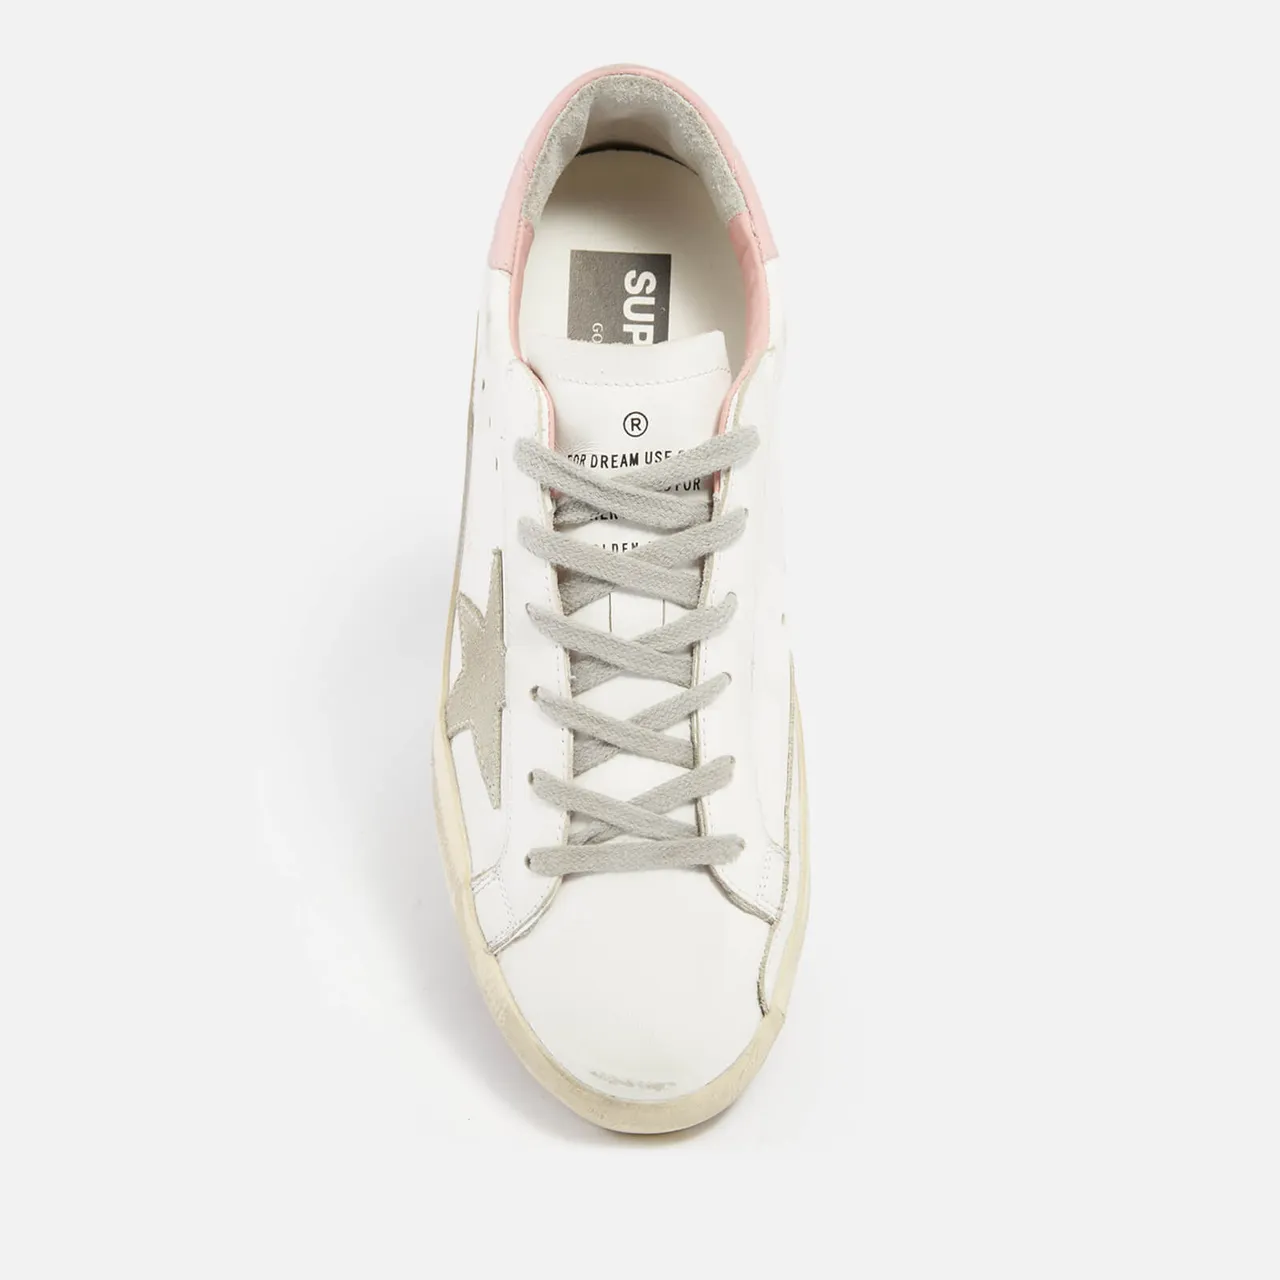 Golden Goose Superstar Distressed Leather and Suede Trainers - UK